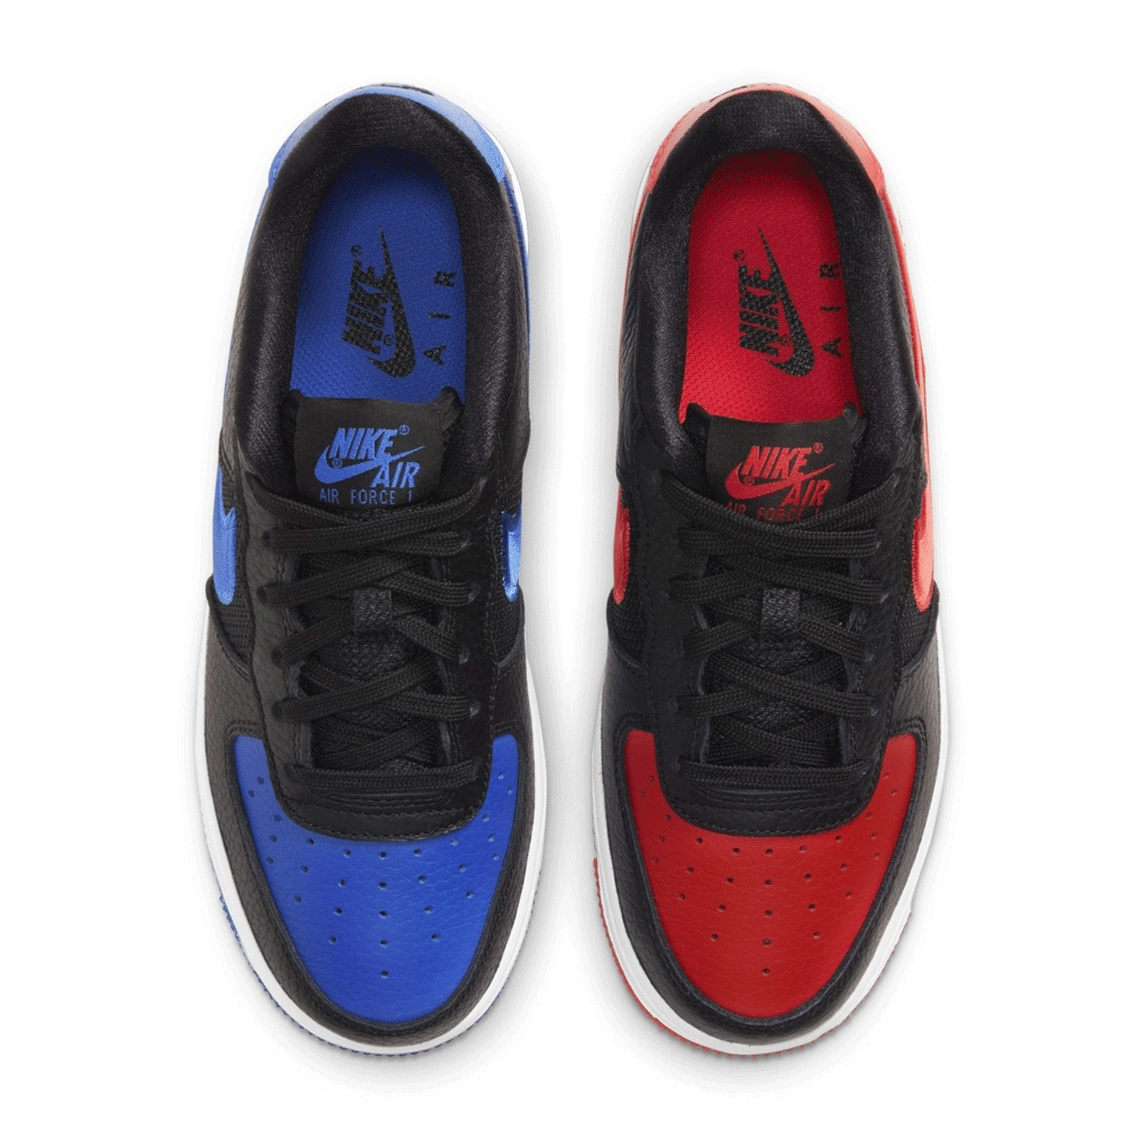 Nike Air Force 1 82 Royal Bred Release 